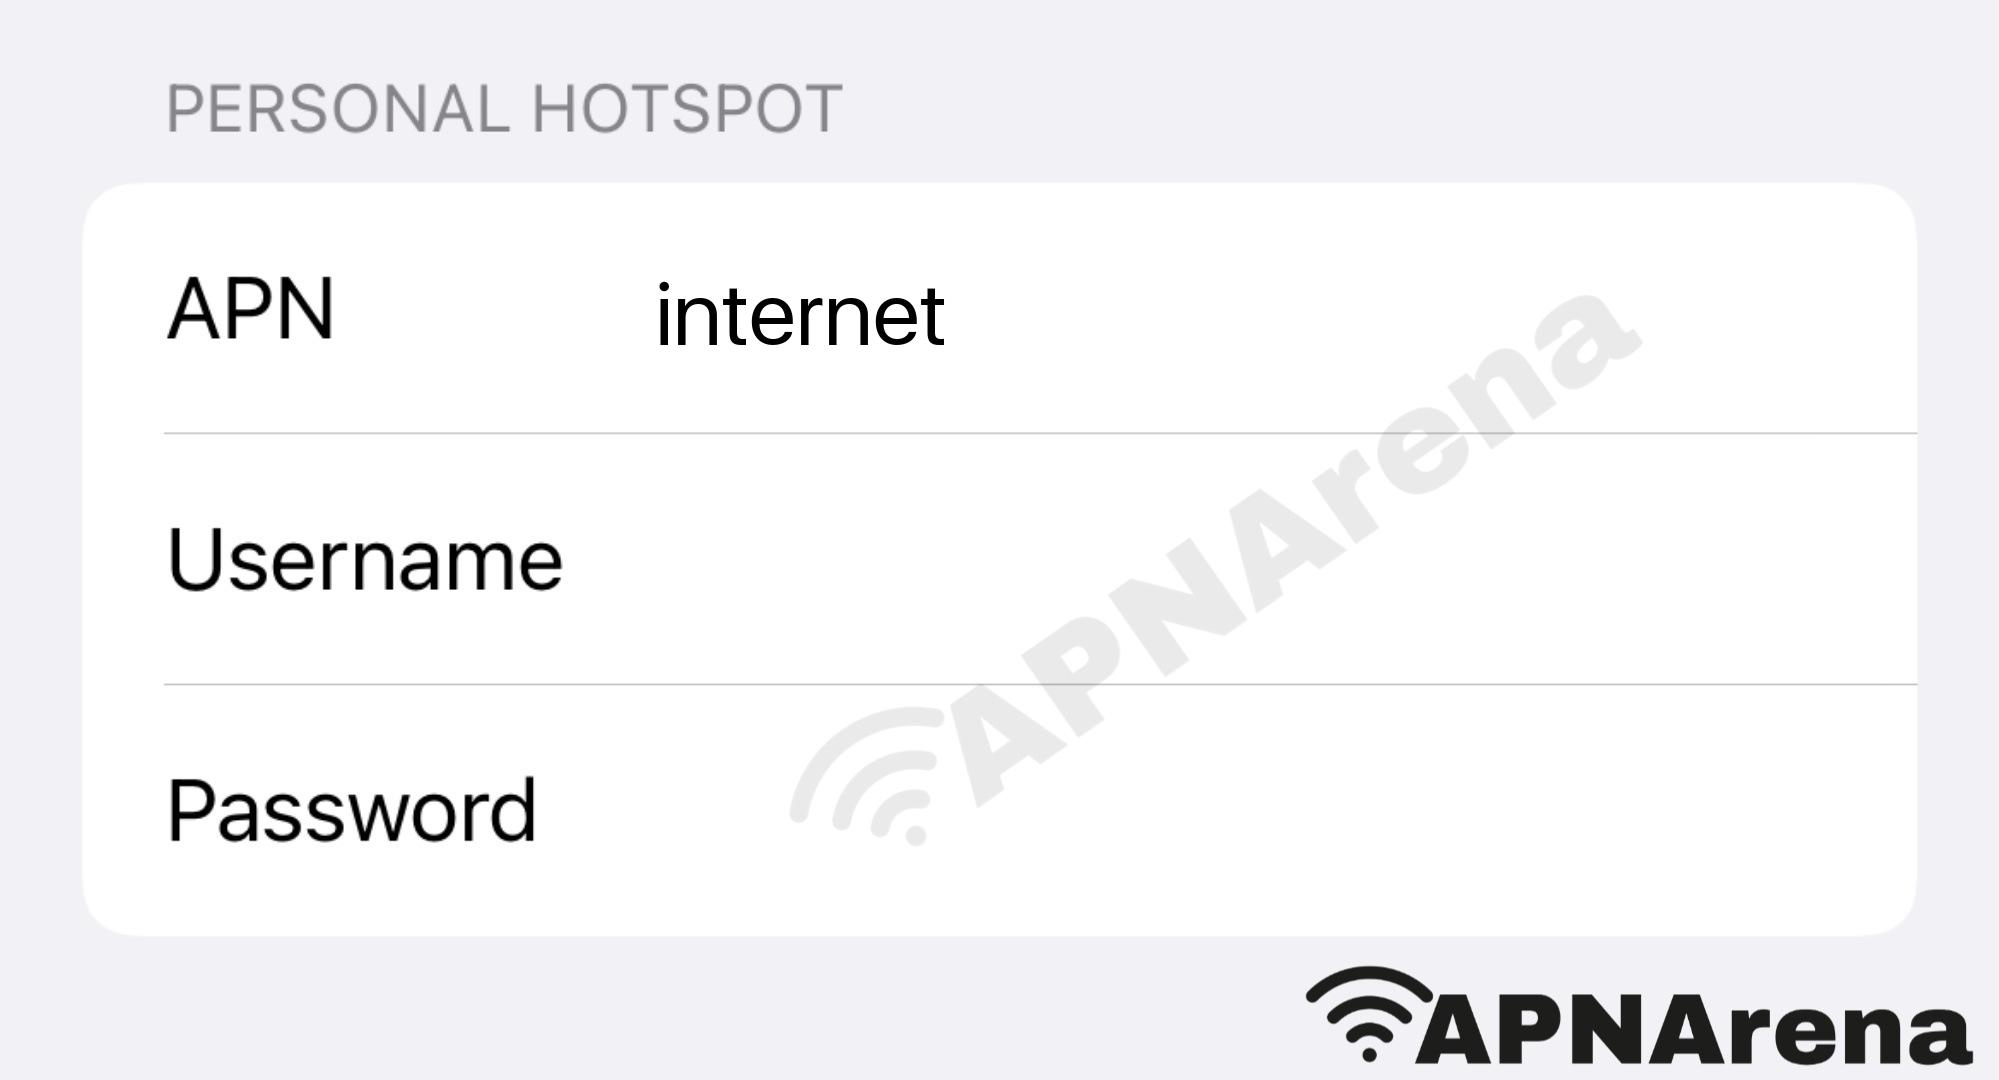 Internode Personal Hotspot Settings for iPhone